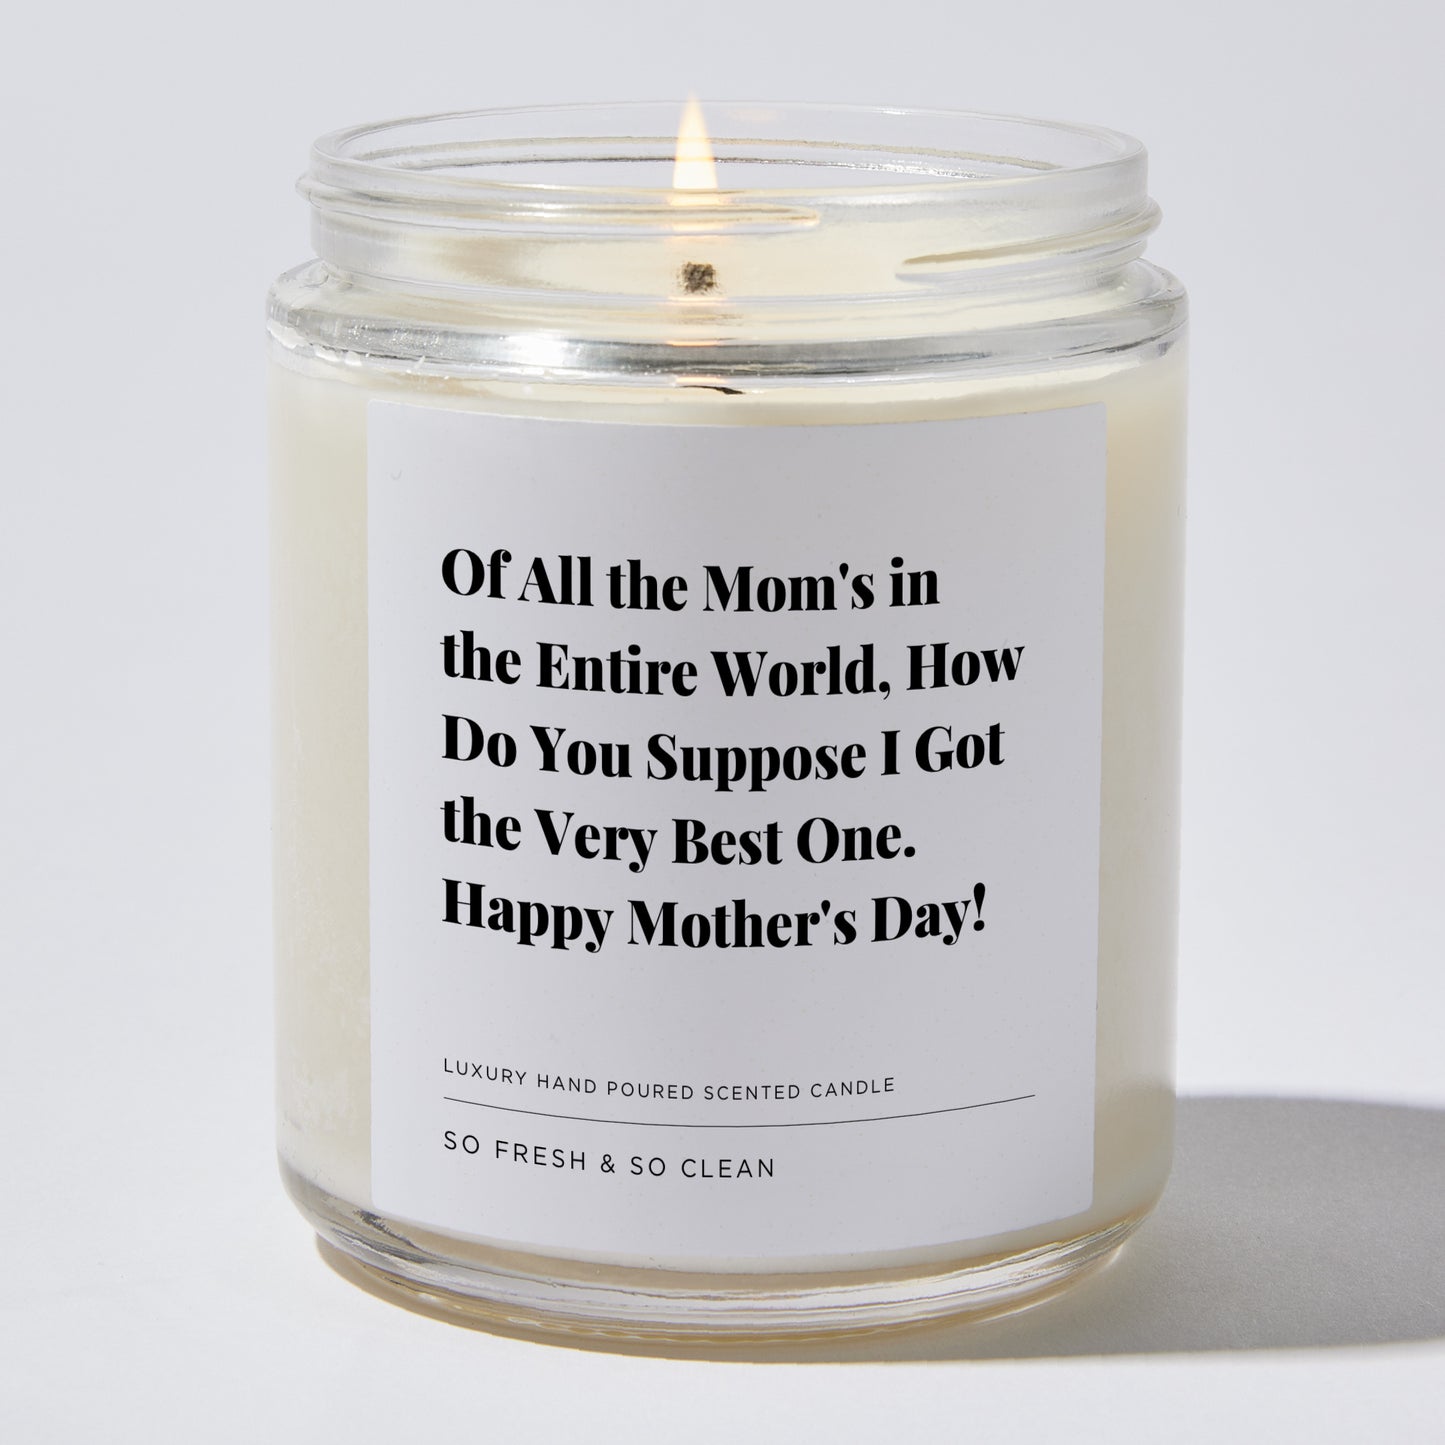 Gift for Mom - Of all the mom's in the entire world, how do you suppose I got the very best one. Happy Mother's Day! - Candle